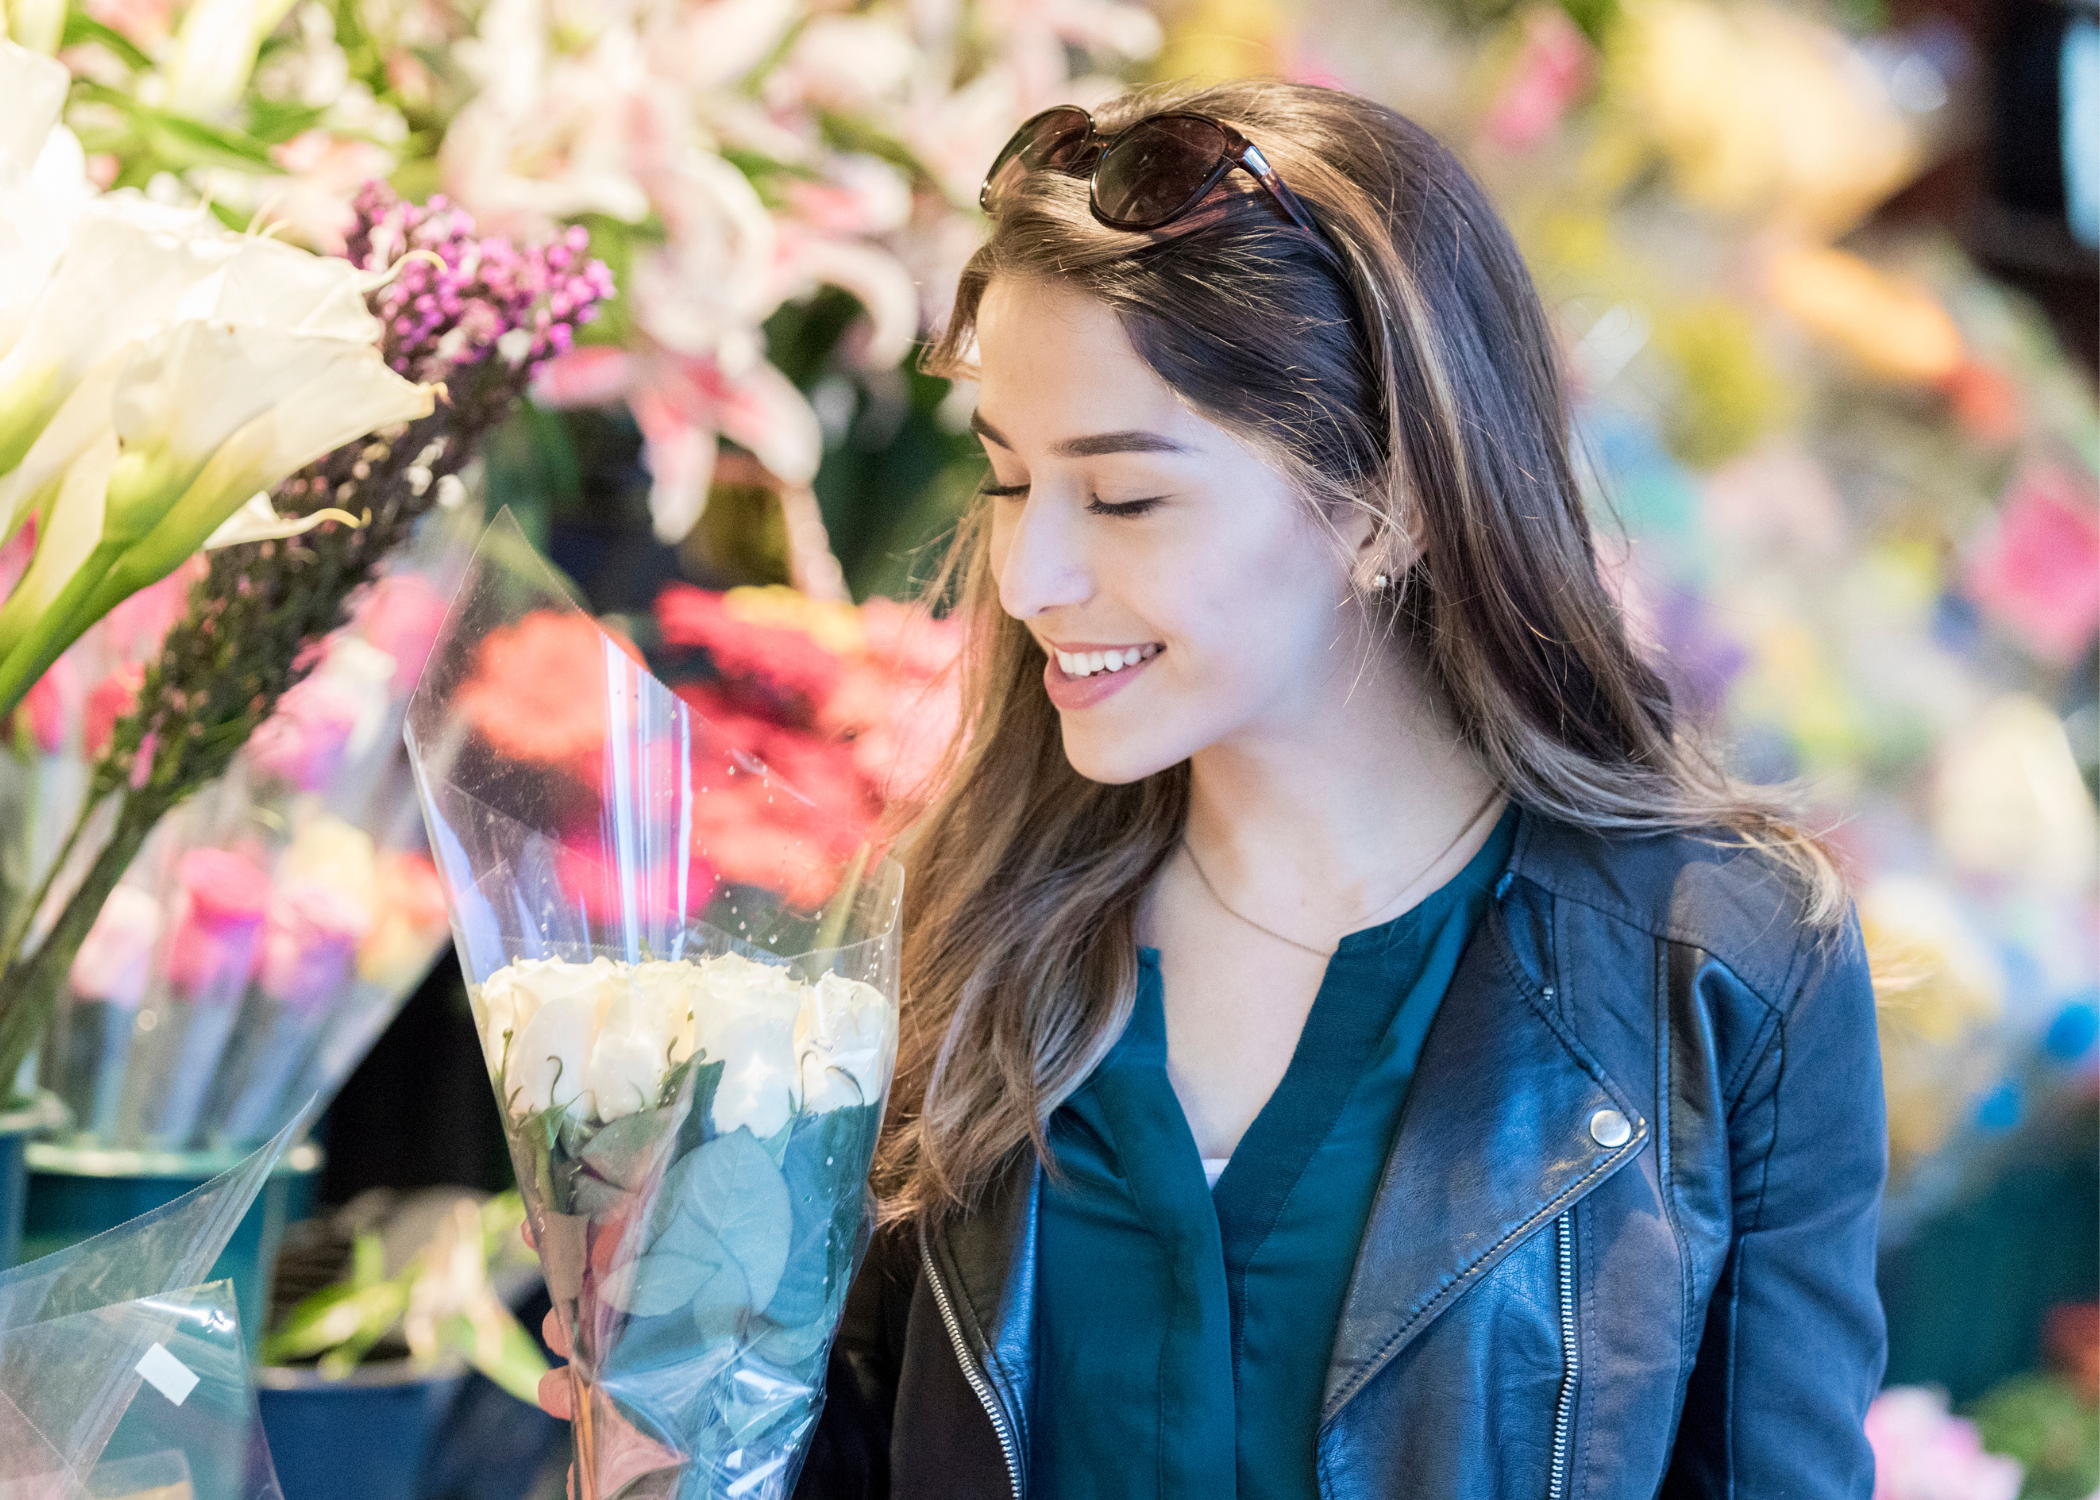 woman shopping for flowers